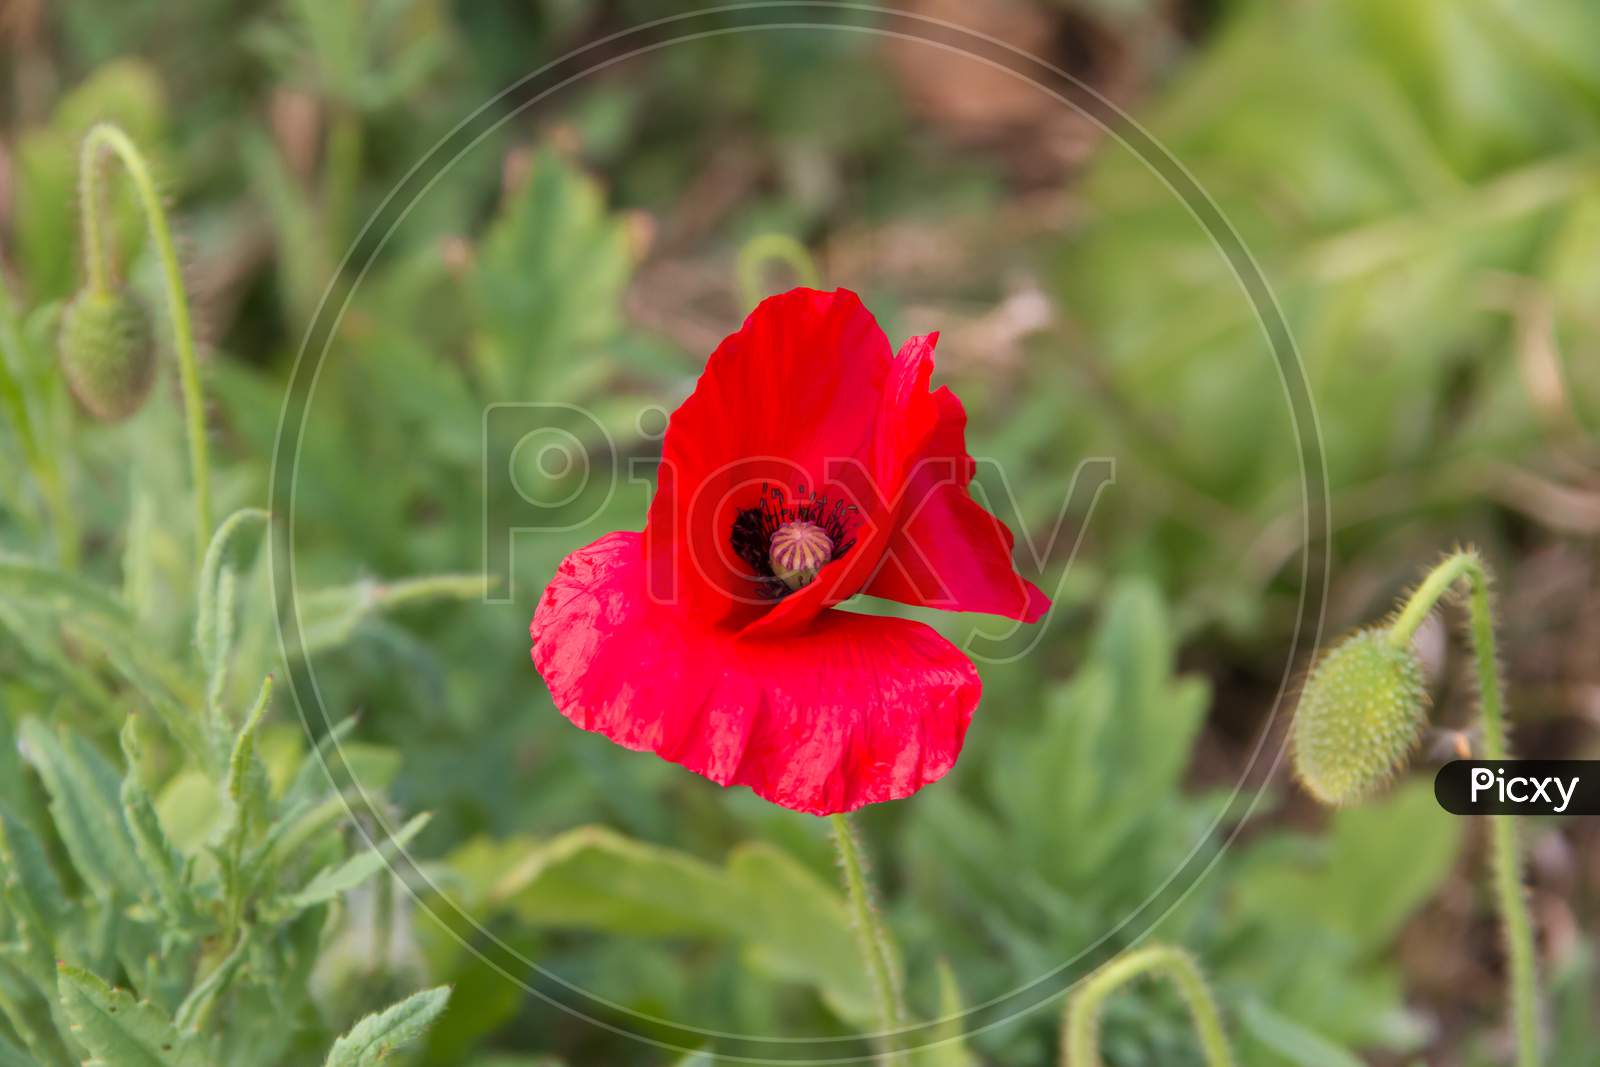 Detail Of The Red Poppy Floret In The Spring